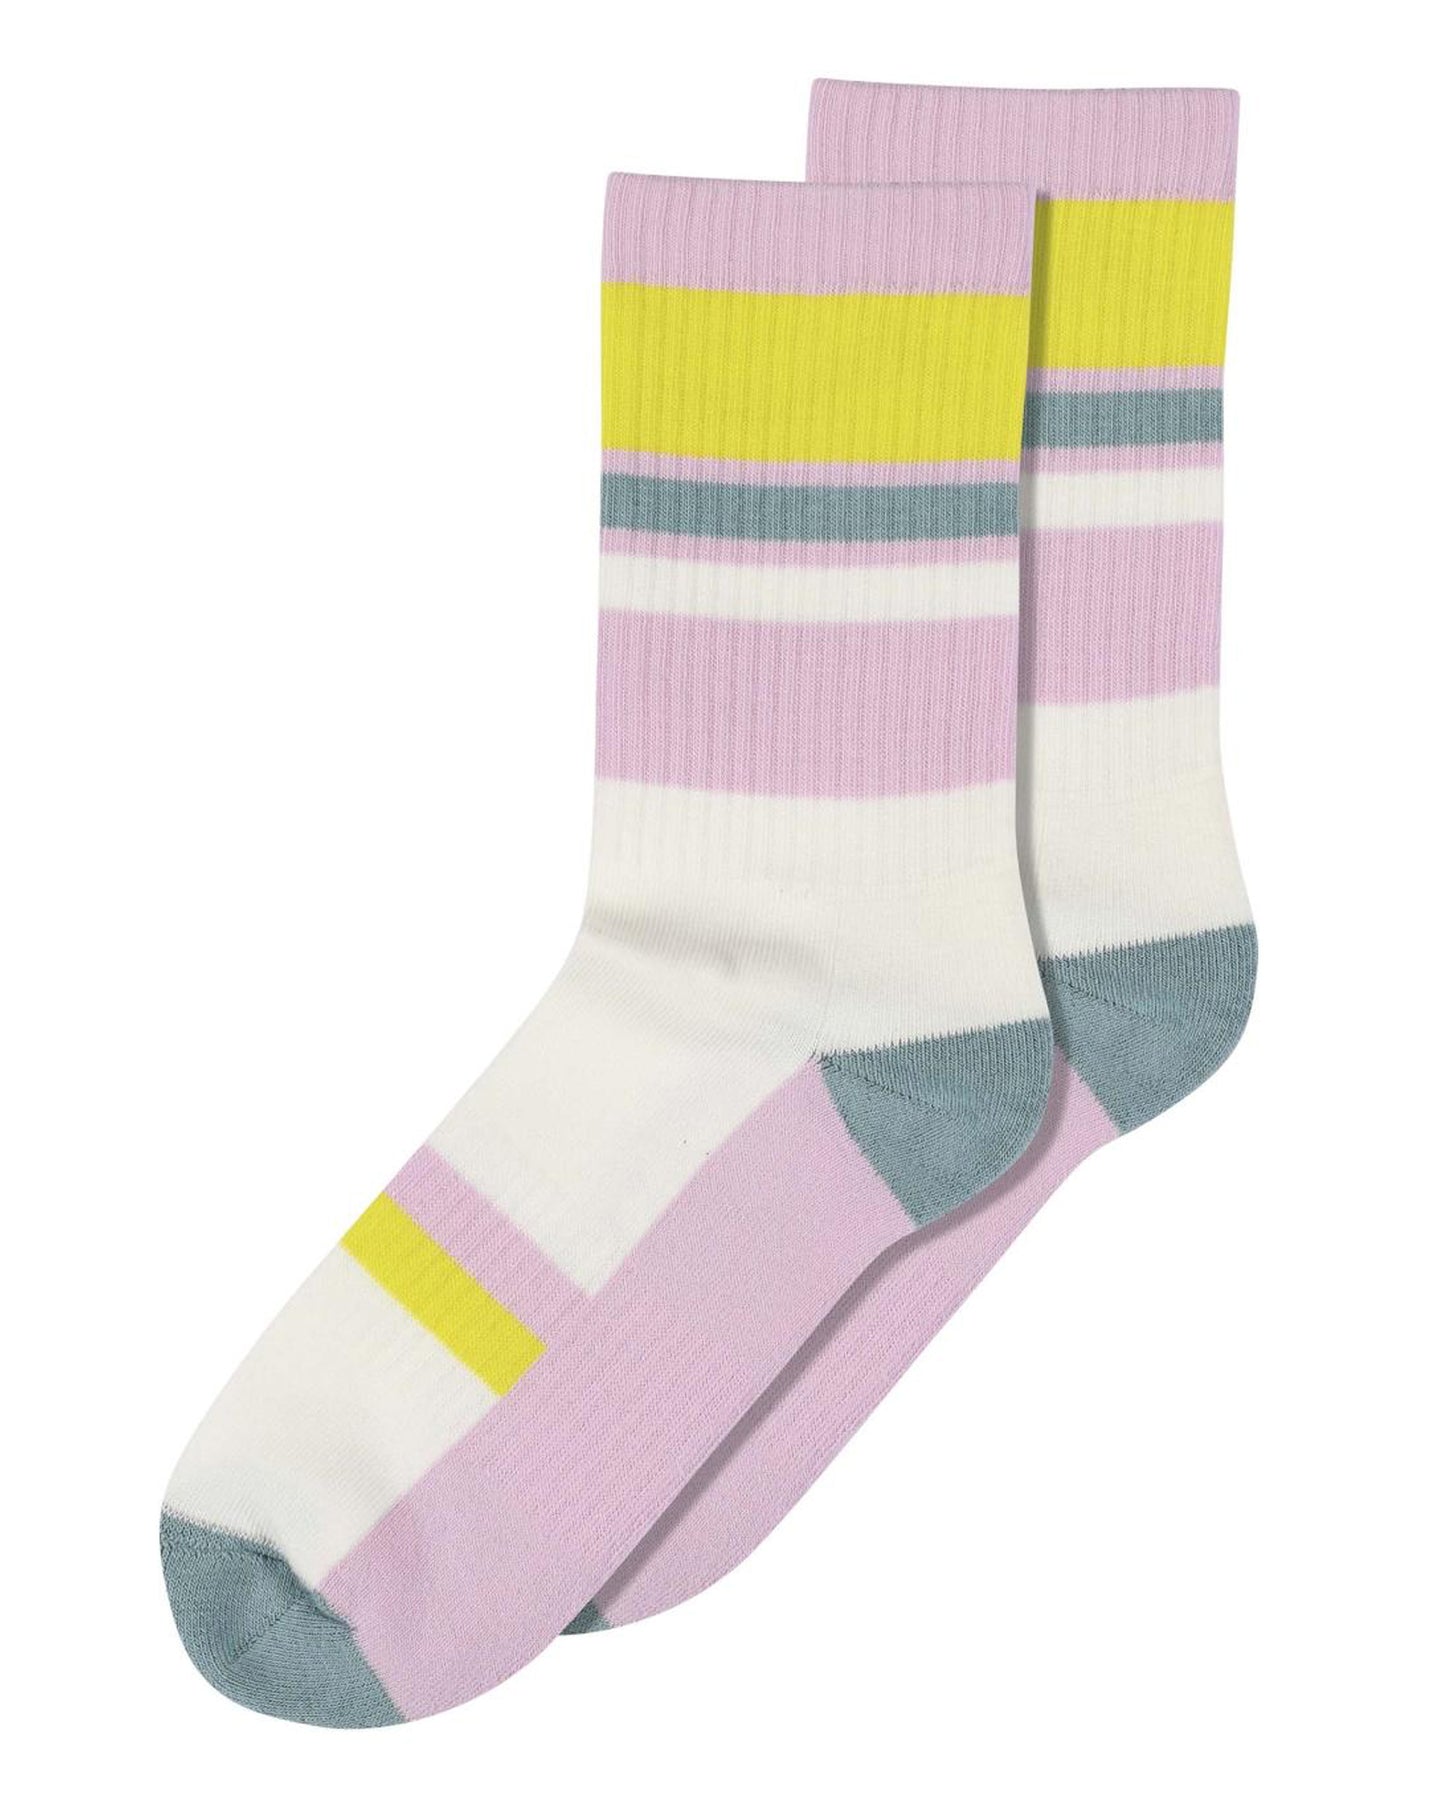 MP Denmark 79694 Sofi Socks - Lilac ribbed crew length ribbed socks with contrast coloured striped panels in lime green, cream and sage green with a sage green toe and heel.